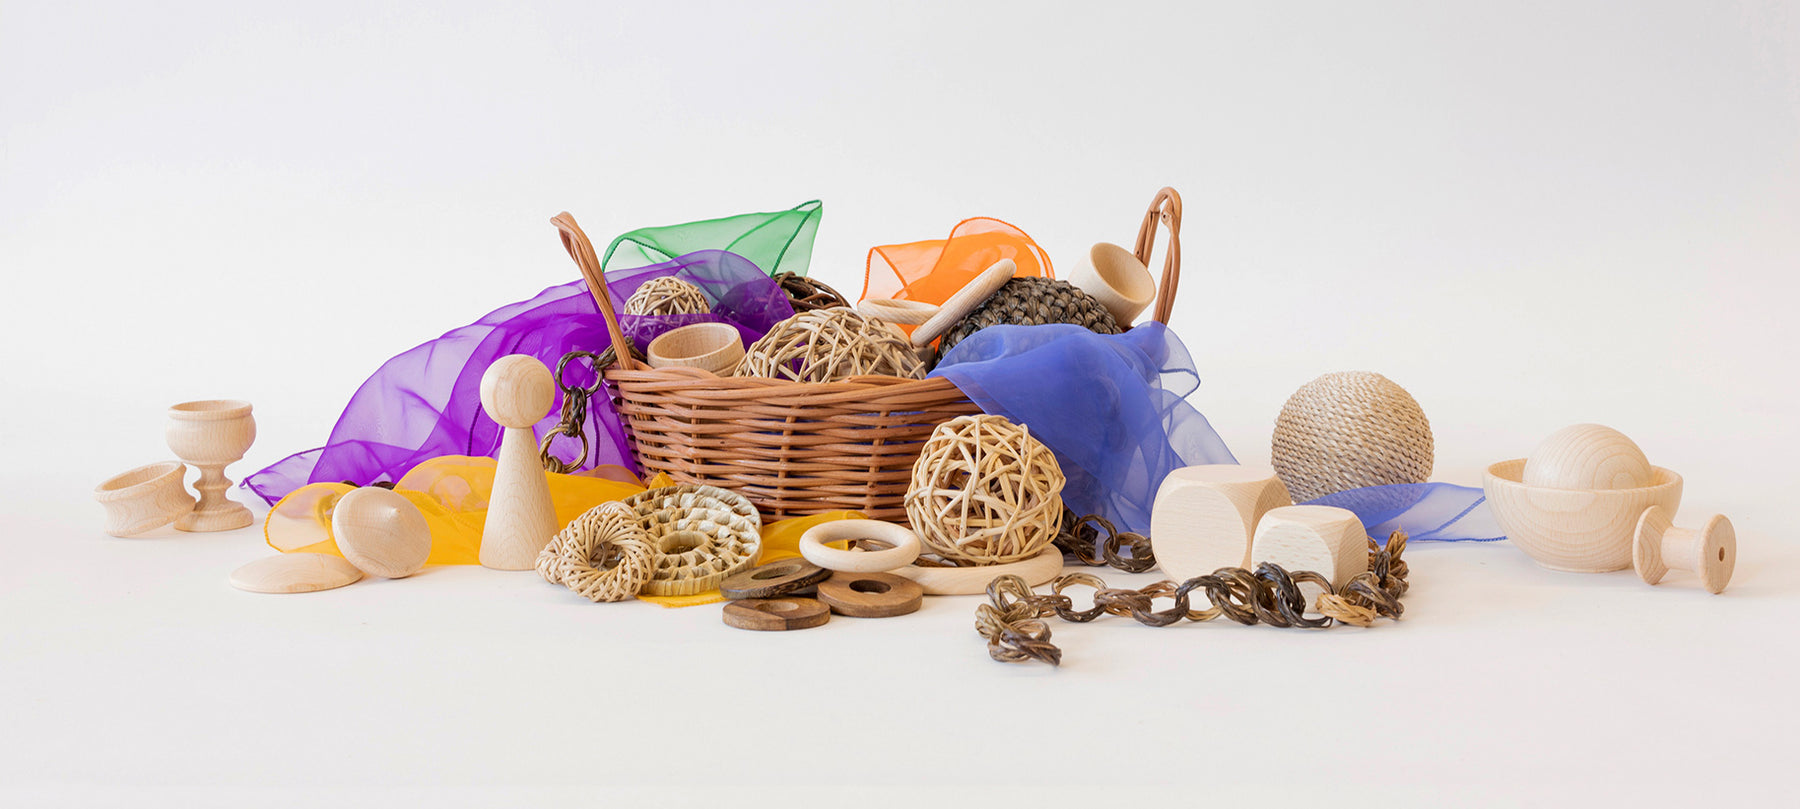 Create Your Own Heuristic Play Basket